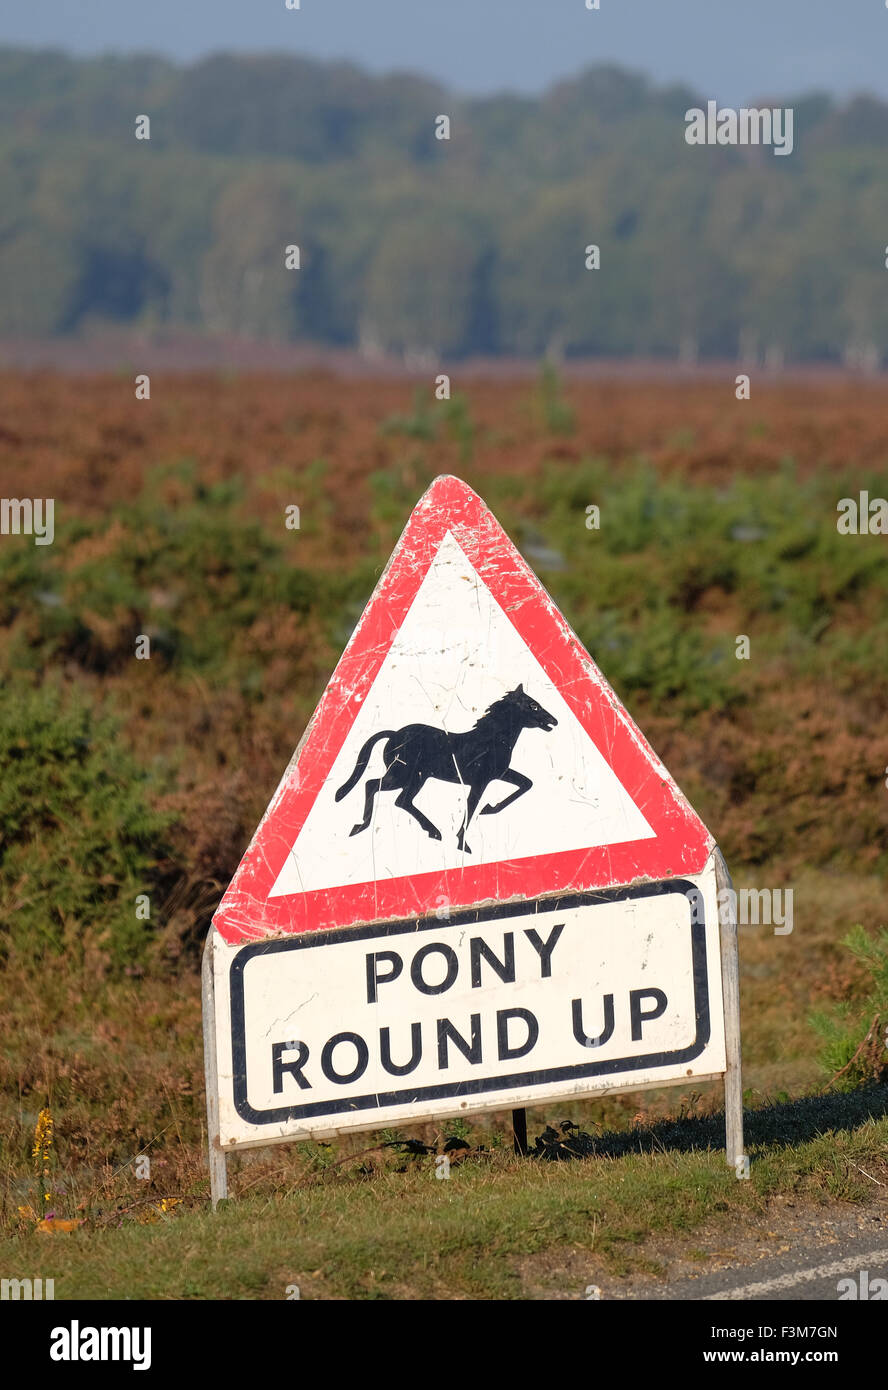 Pony round up caution road sign in the New Forest Hampshire UK Stock Photo